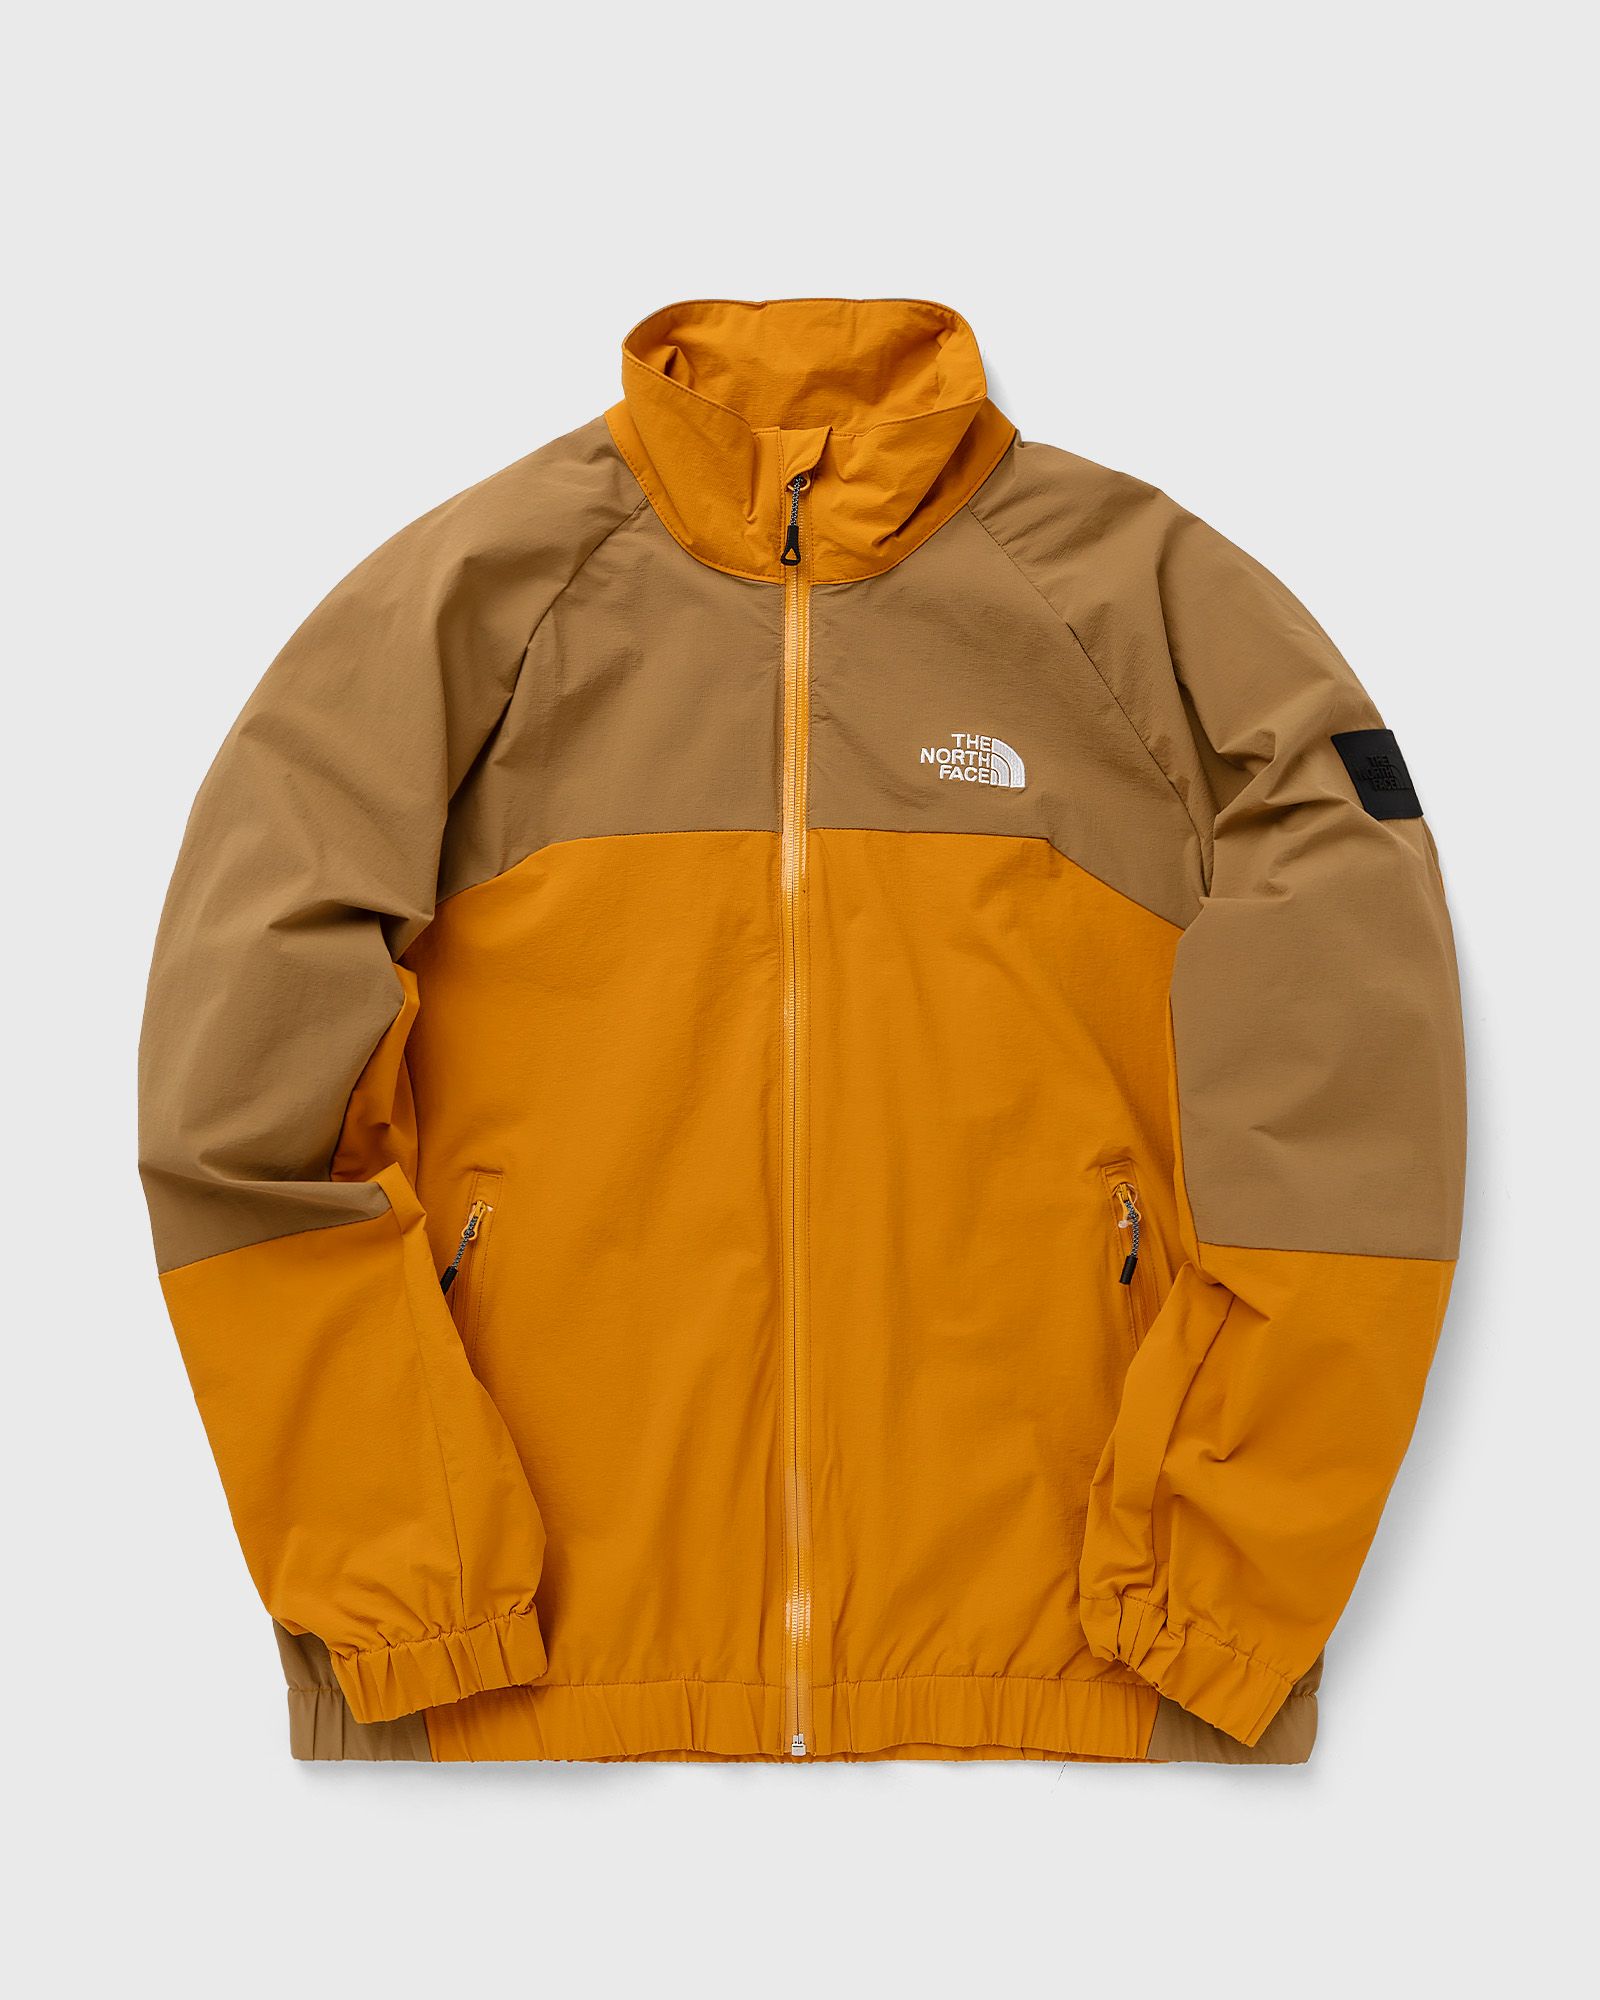 The North Face - nse shell suit top men track jackets|windbreaker yellow in größe:m